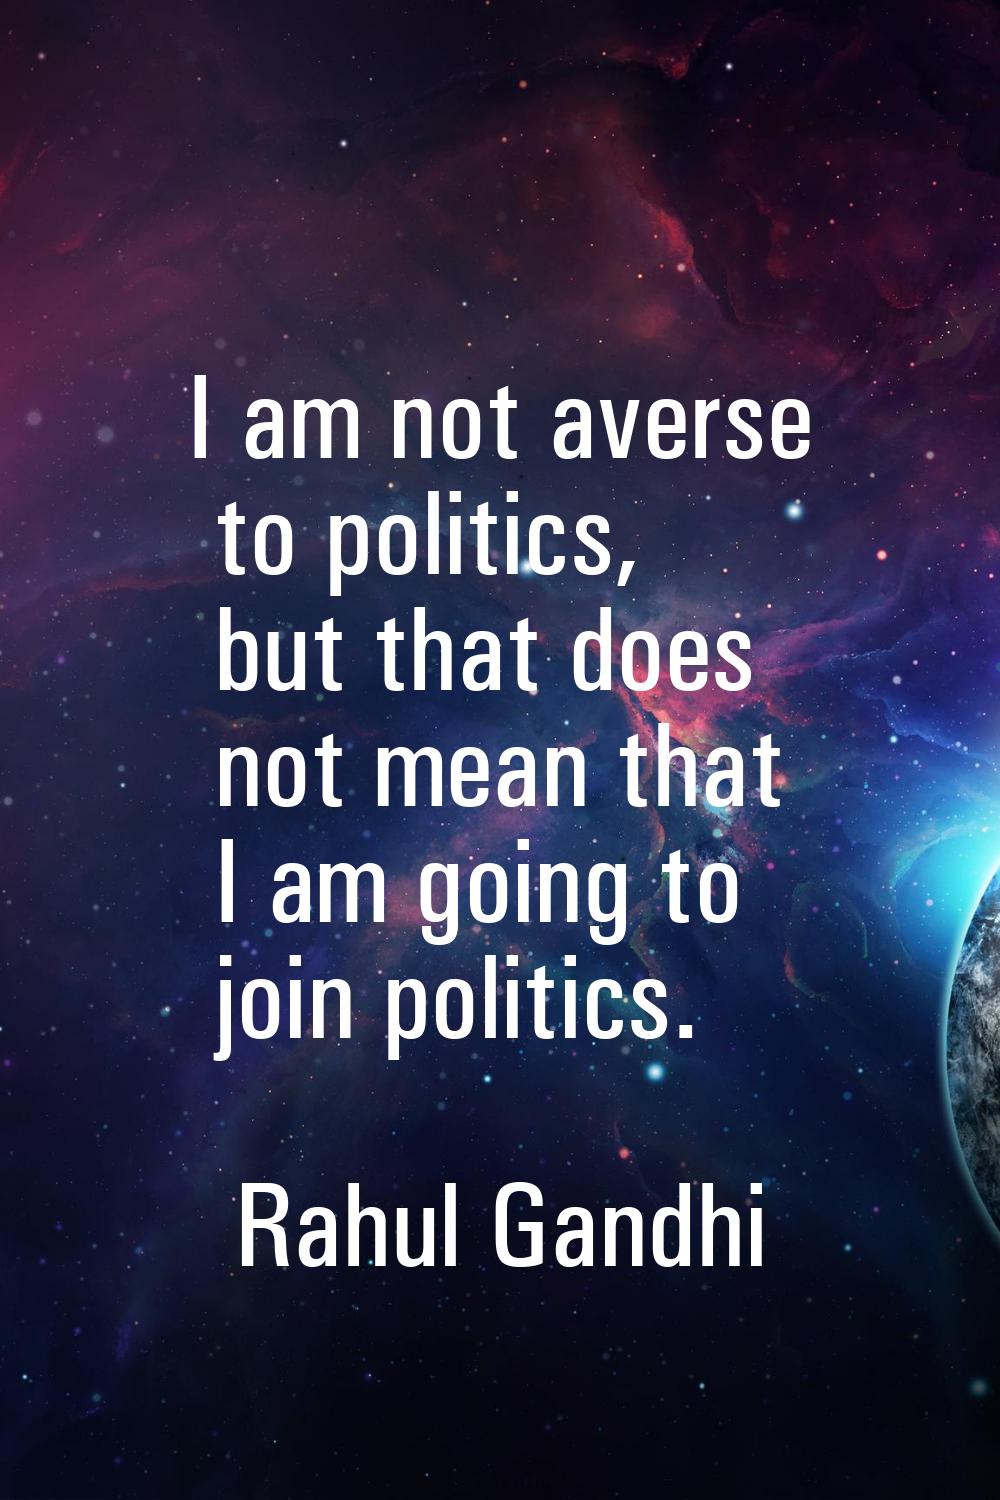 I am not averse to politics, but that does not mean that I am going to join politics.